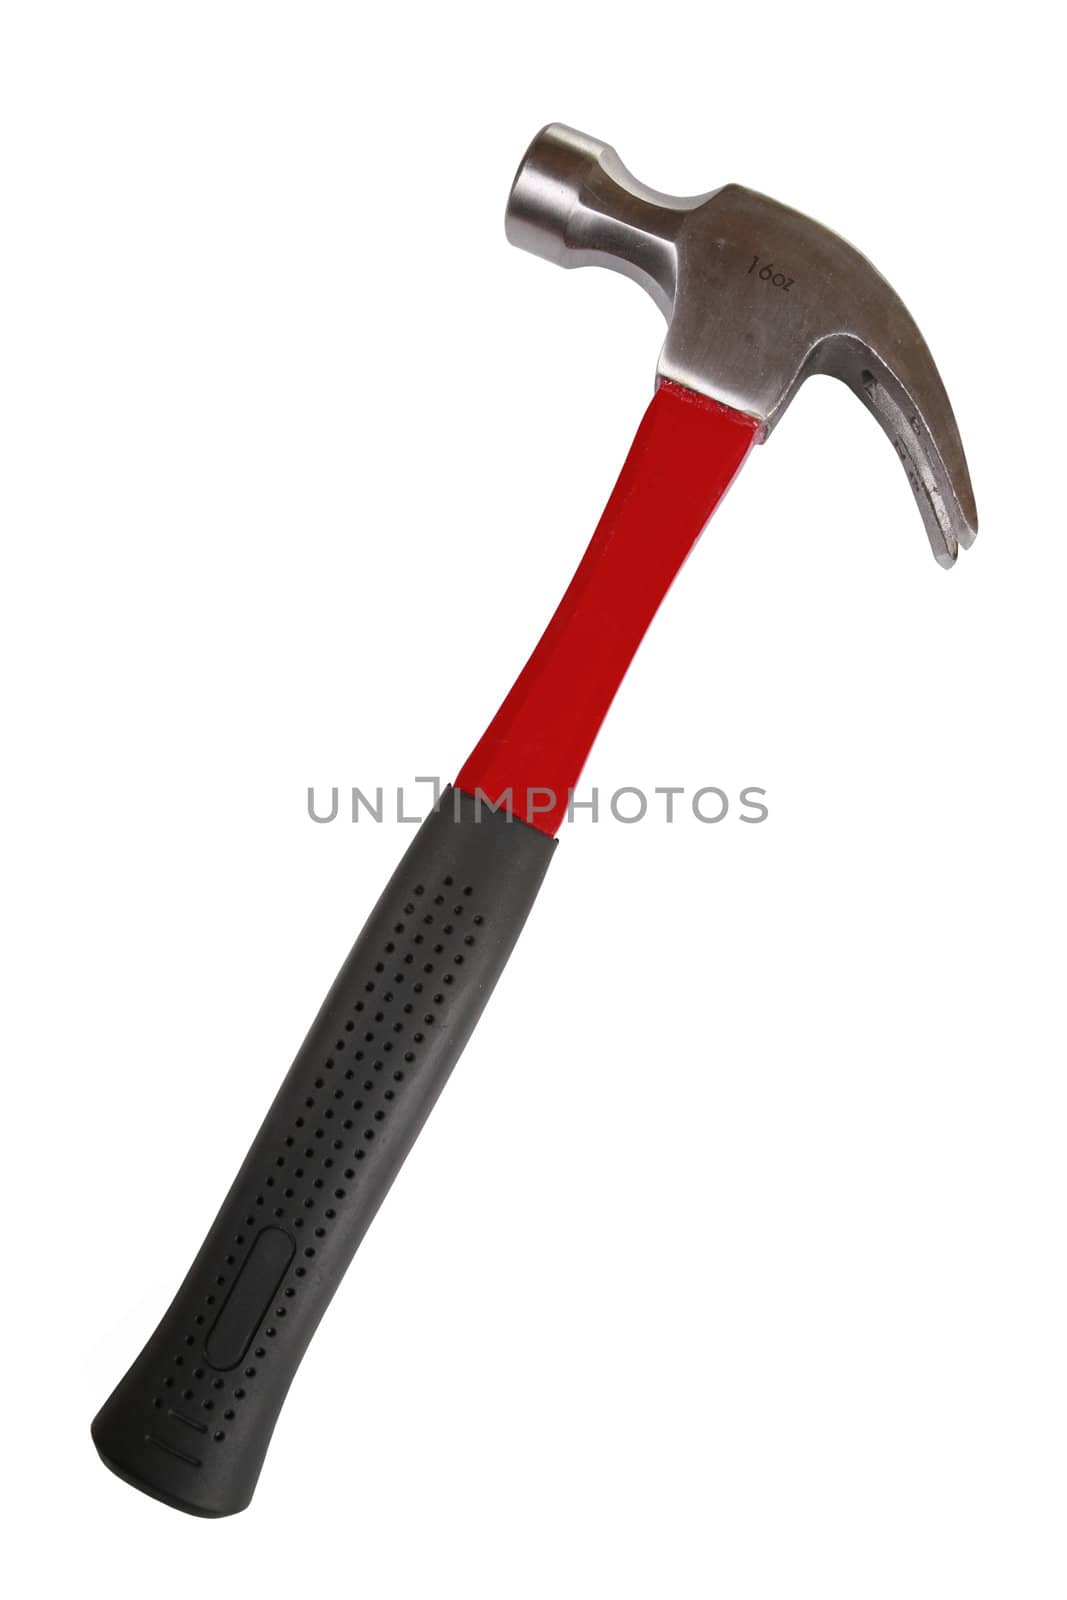 Red hammer isolated on white